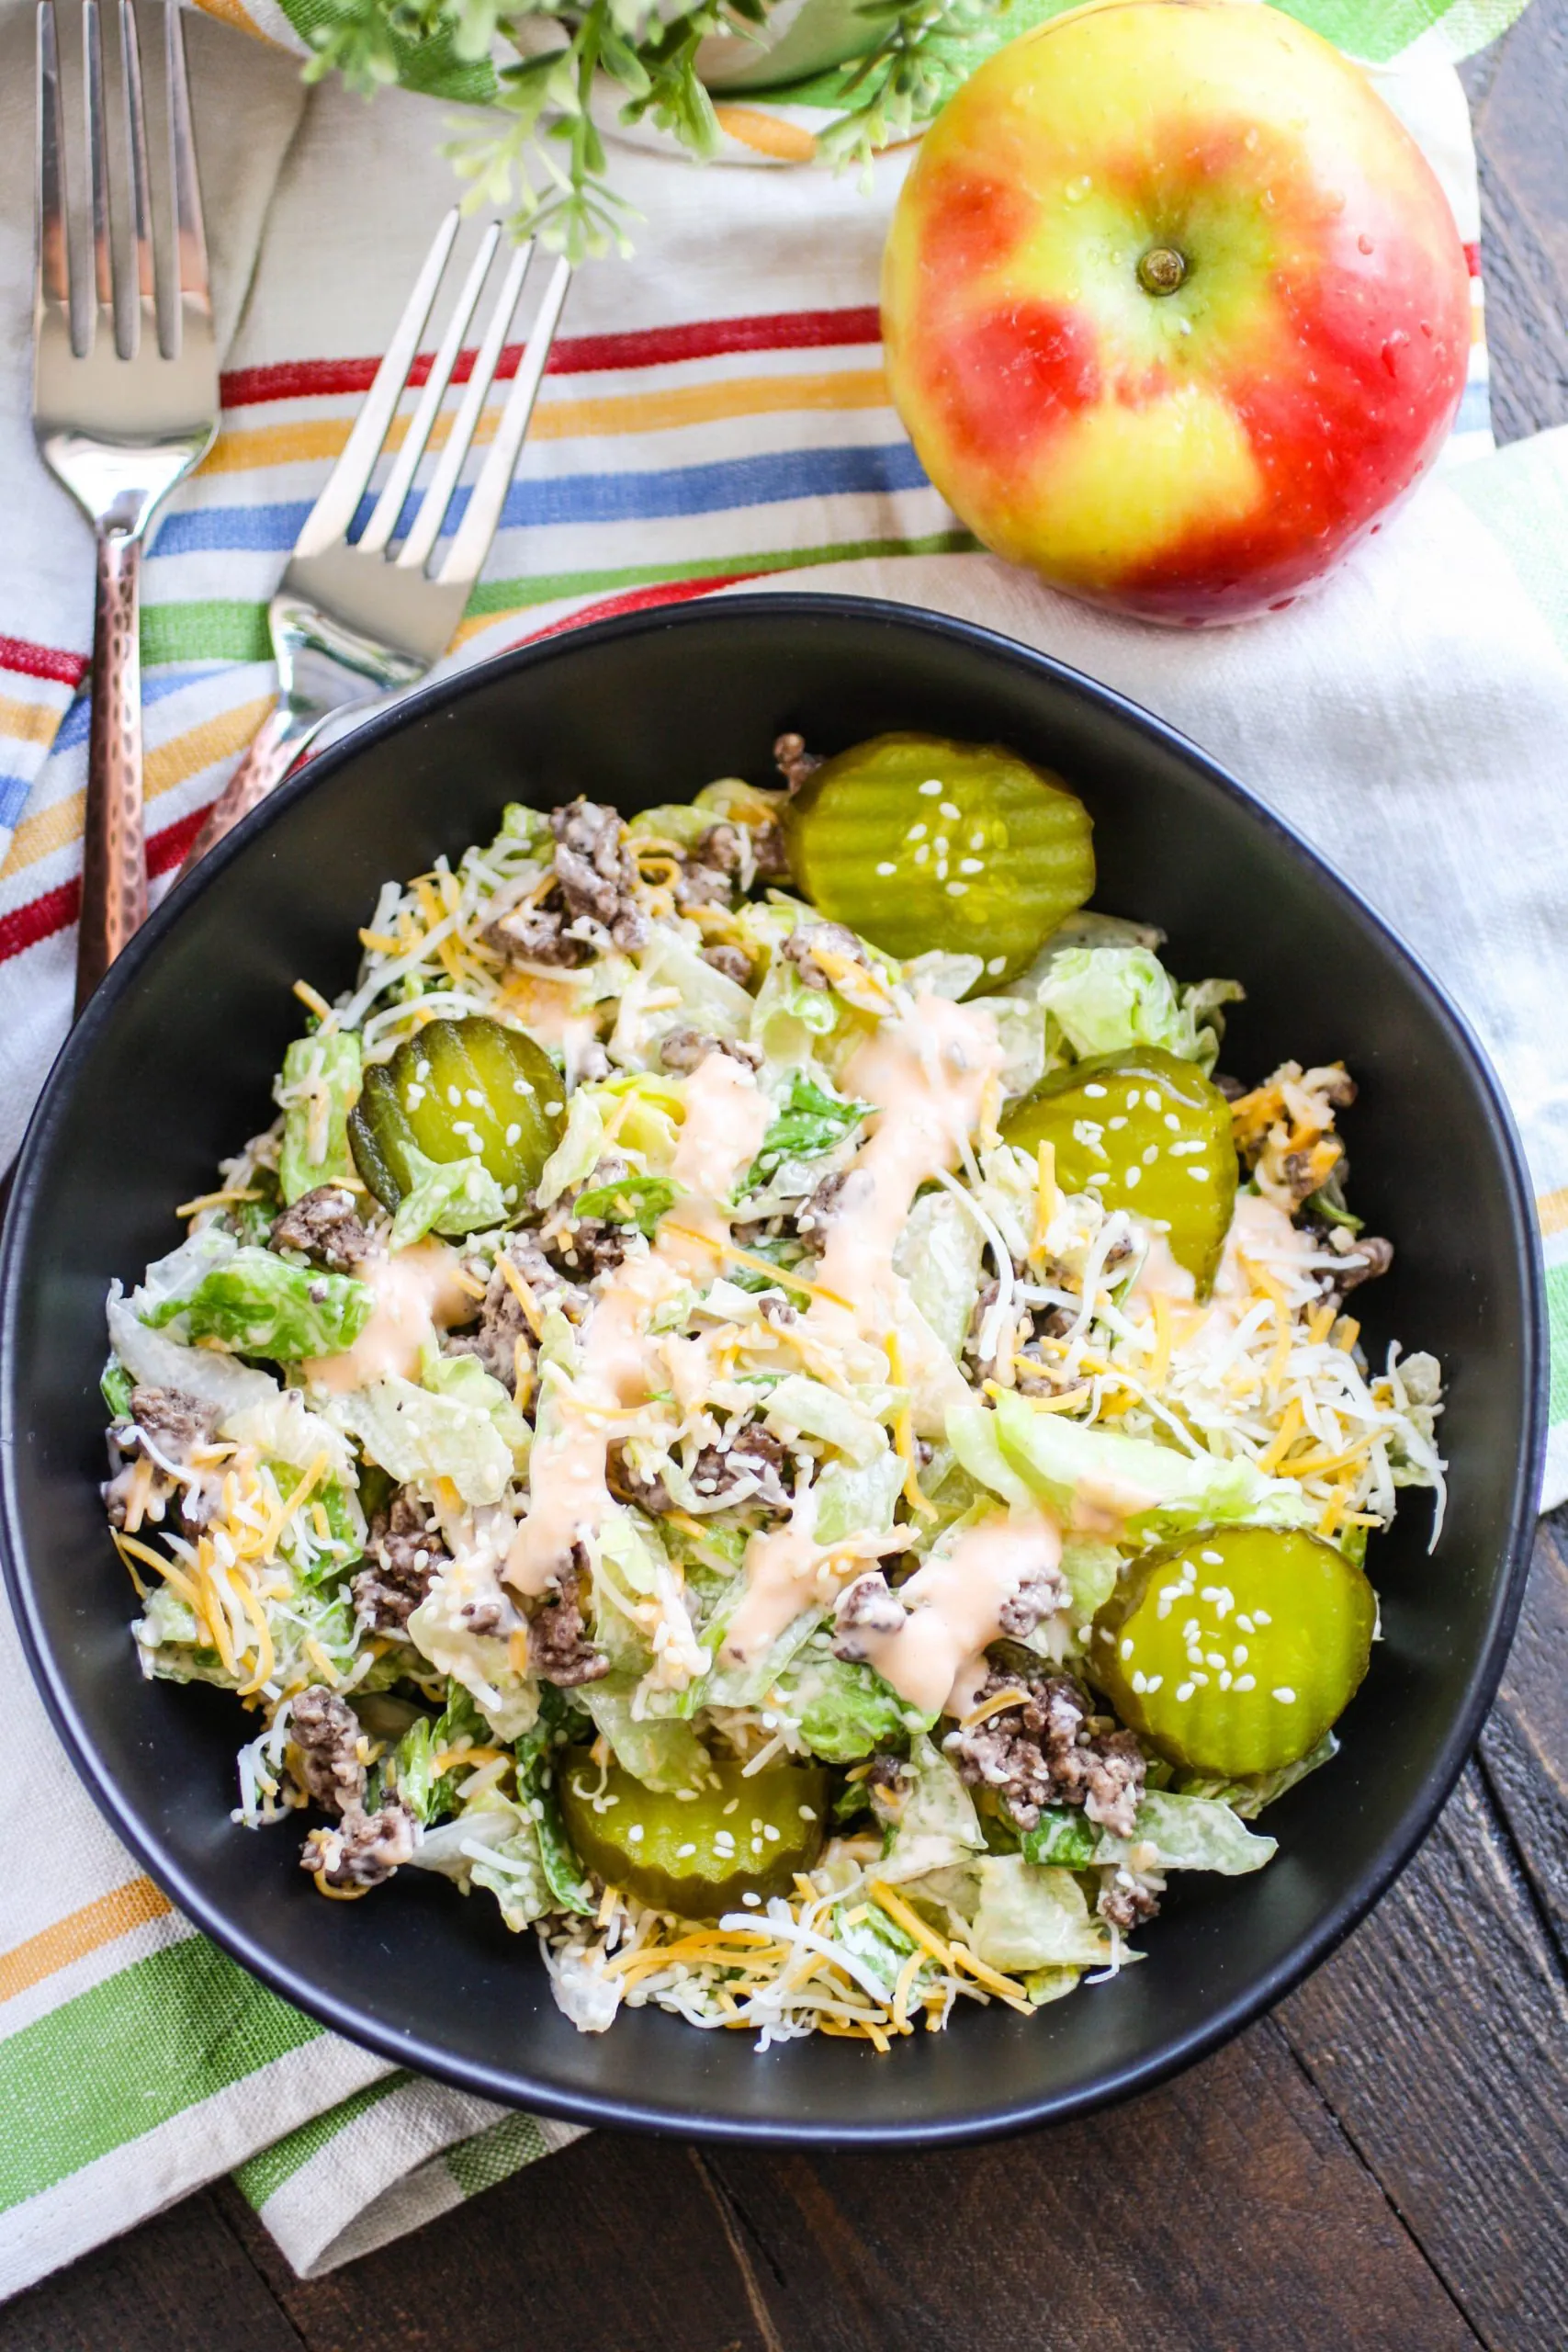 Easy “Big Mac” Salad is easy to make and you probably have all the ingredients!